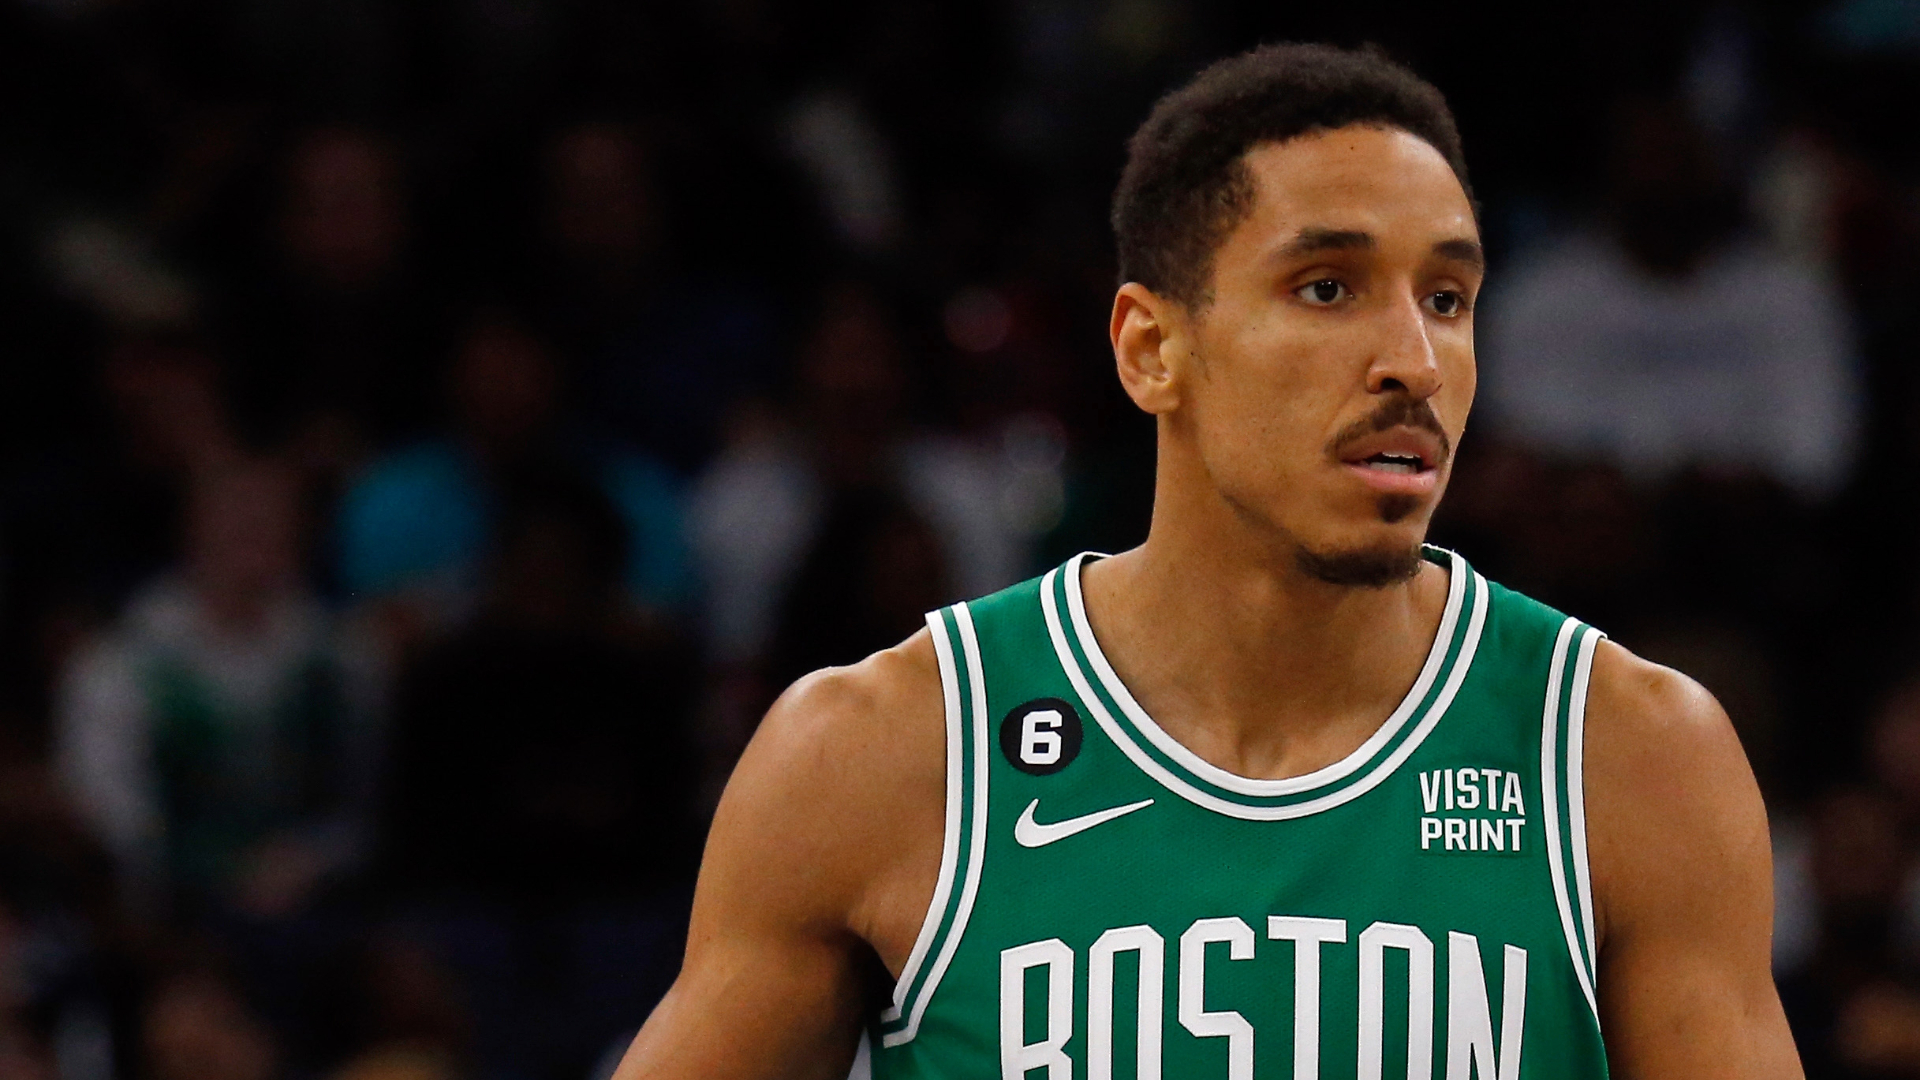 NBA execs: Pacers likely trading Malcolm Brogdon in the offseason